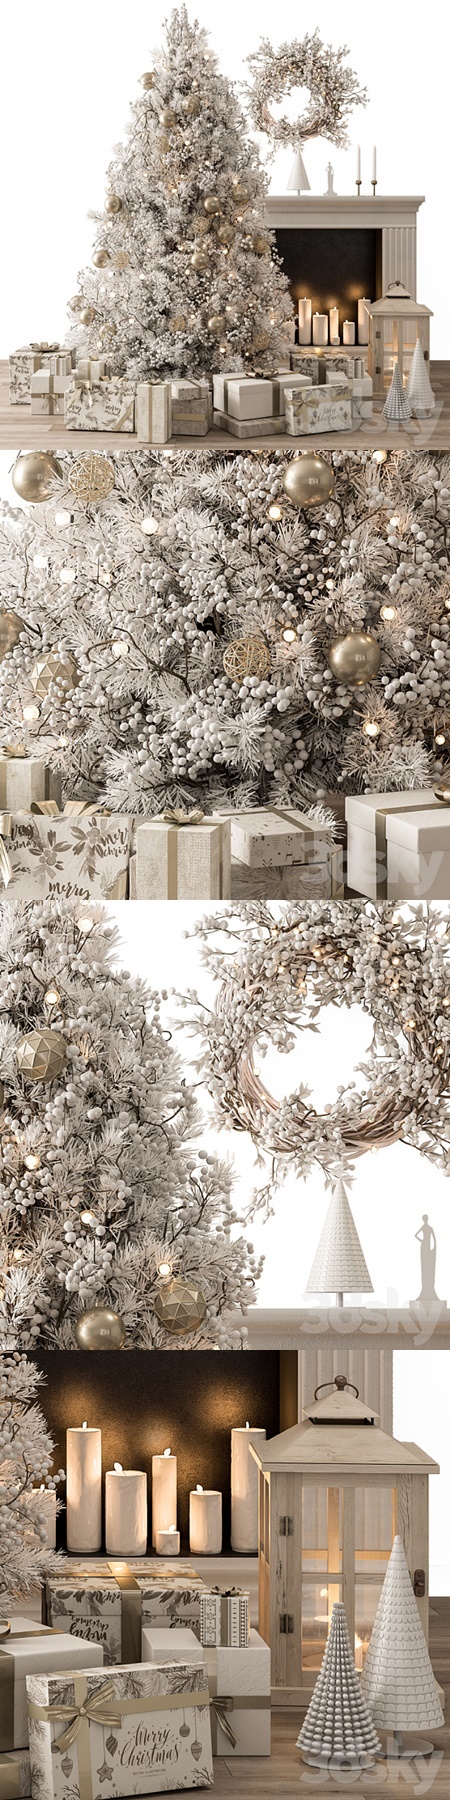 Christmas Decoration 26 - Christmas Gold and White Tree with Gift